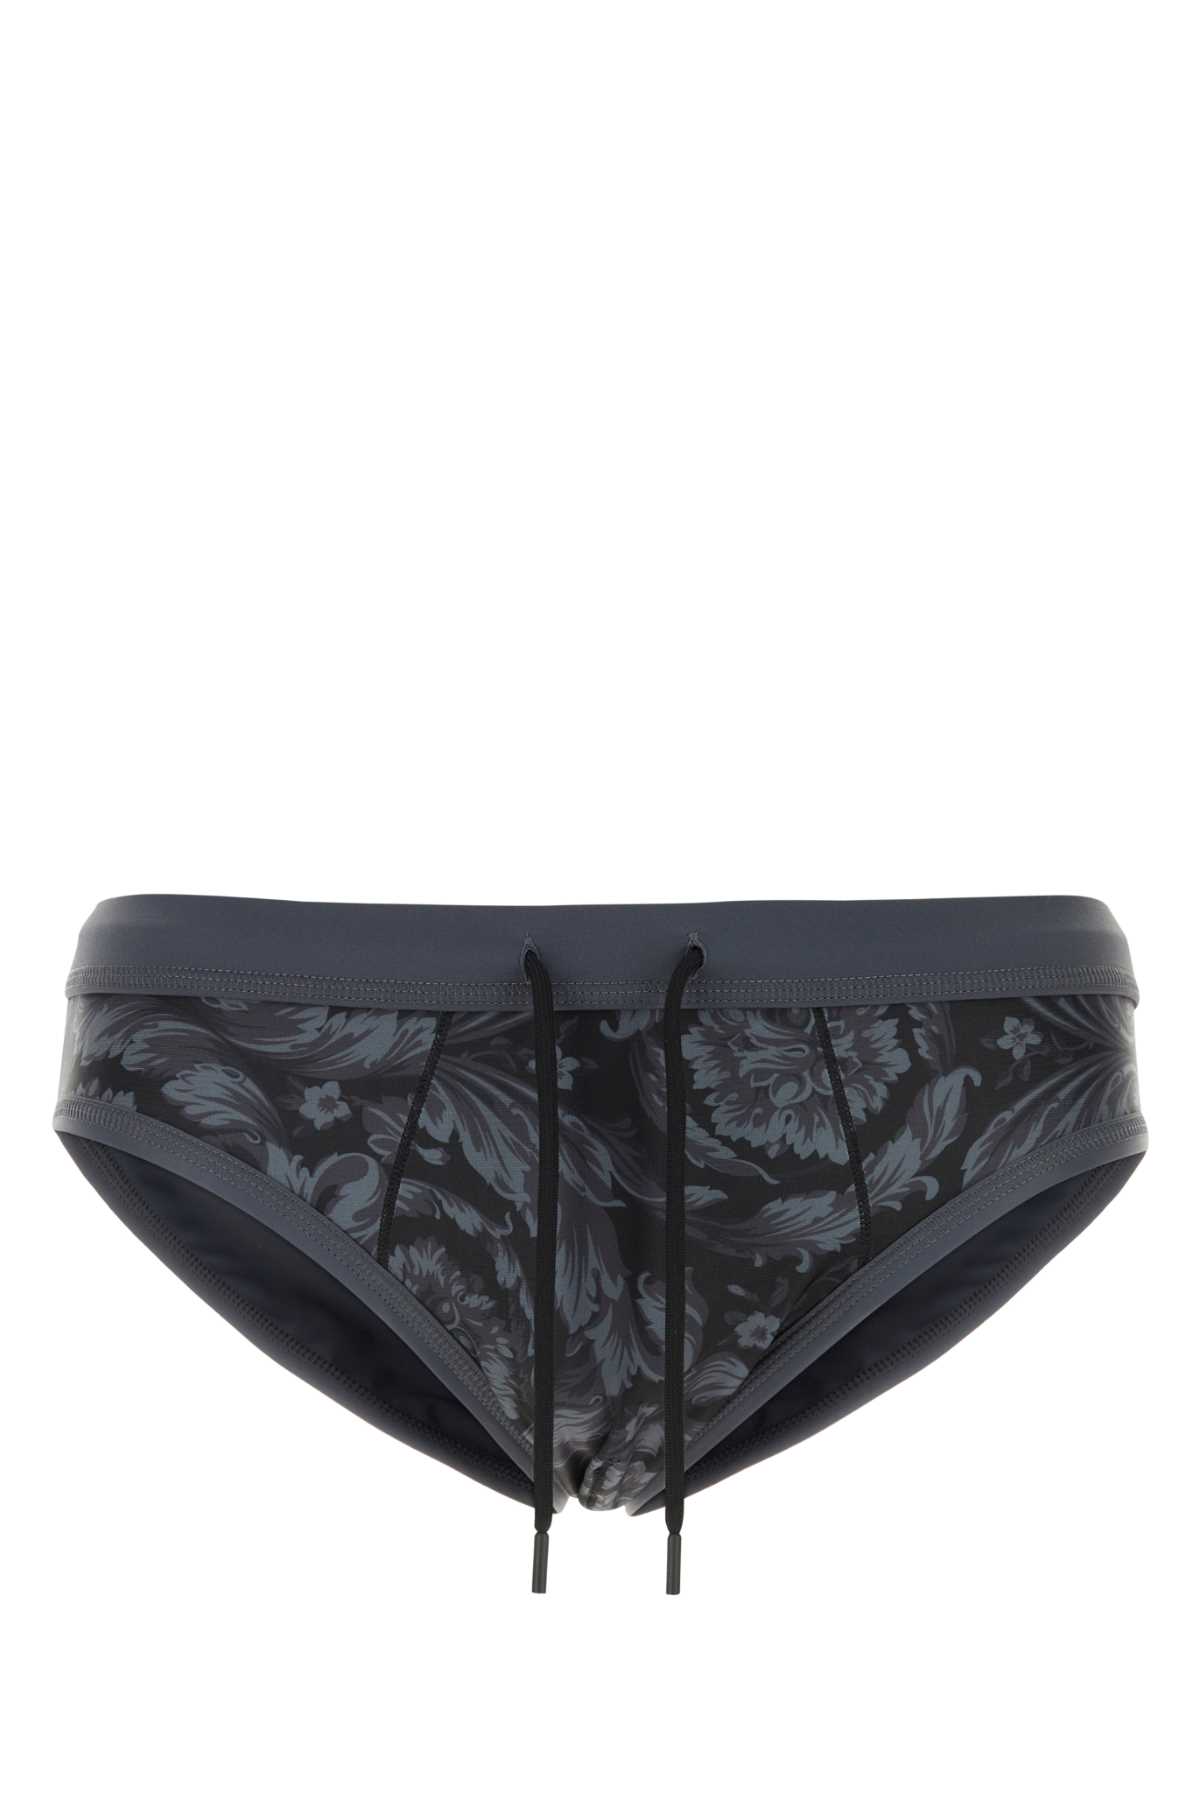 Shop Versace Printed Stretch Polyester Swimming Brief In Black5bc10